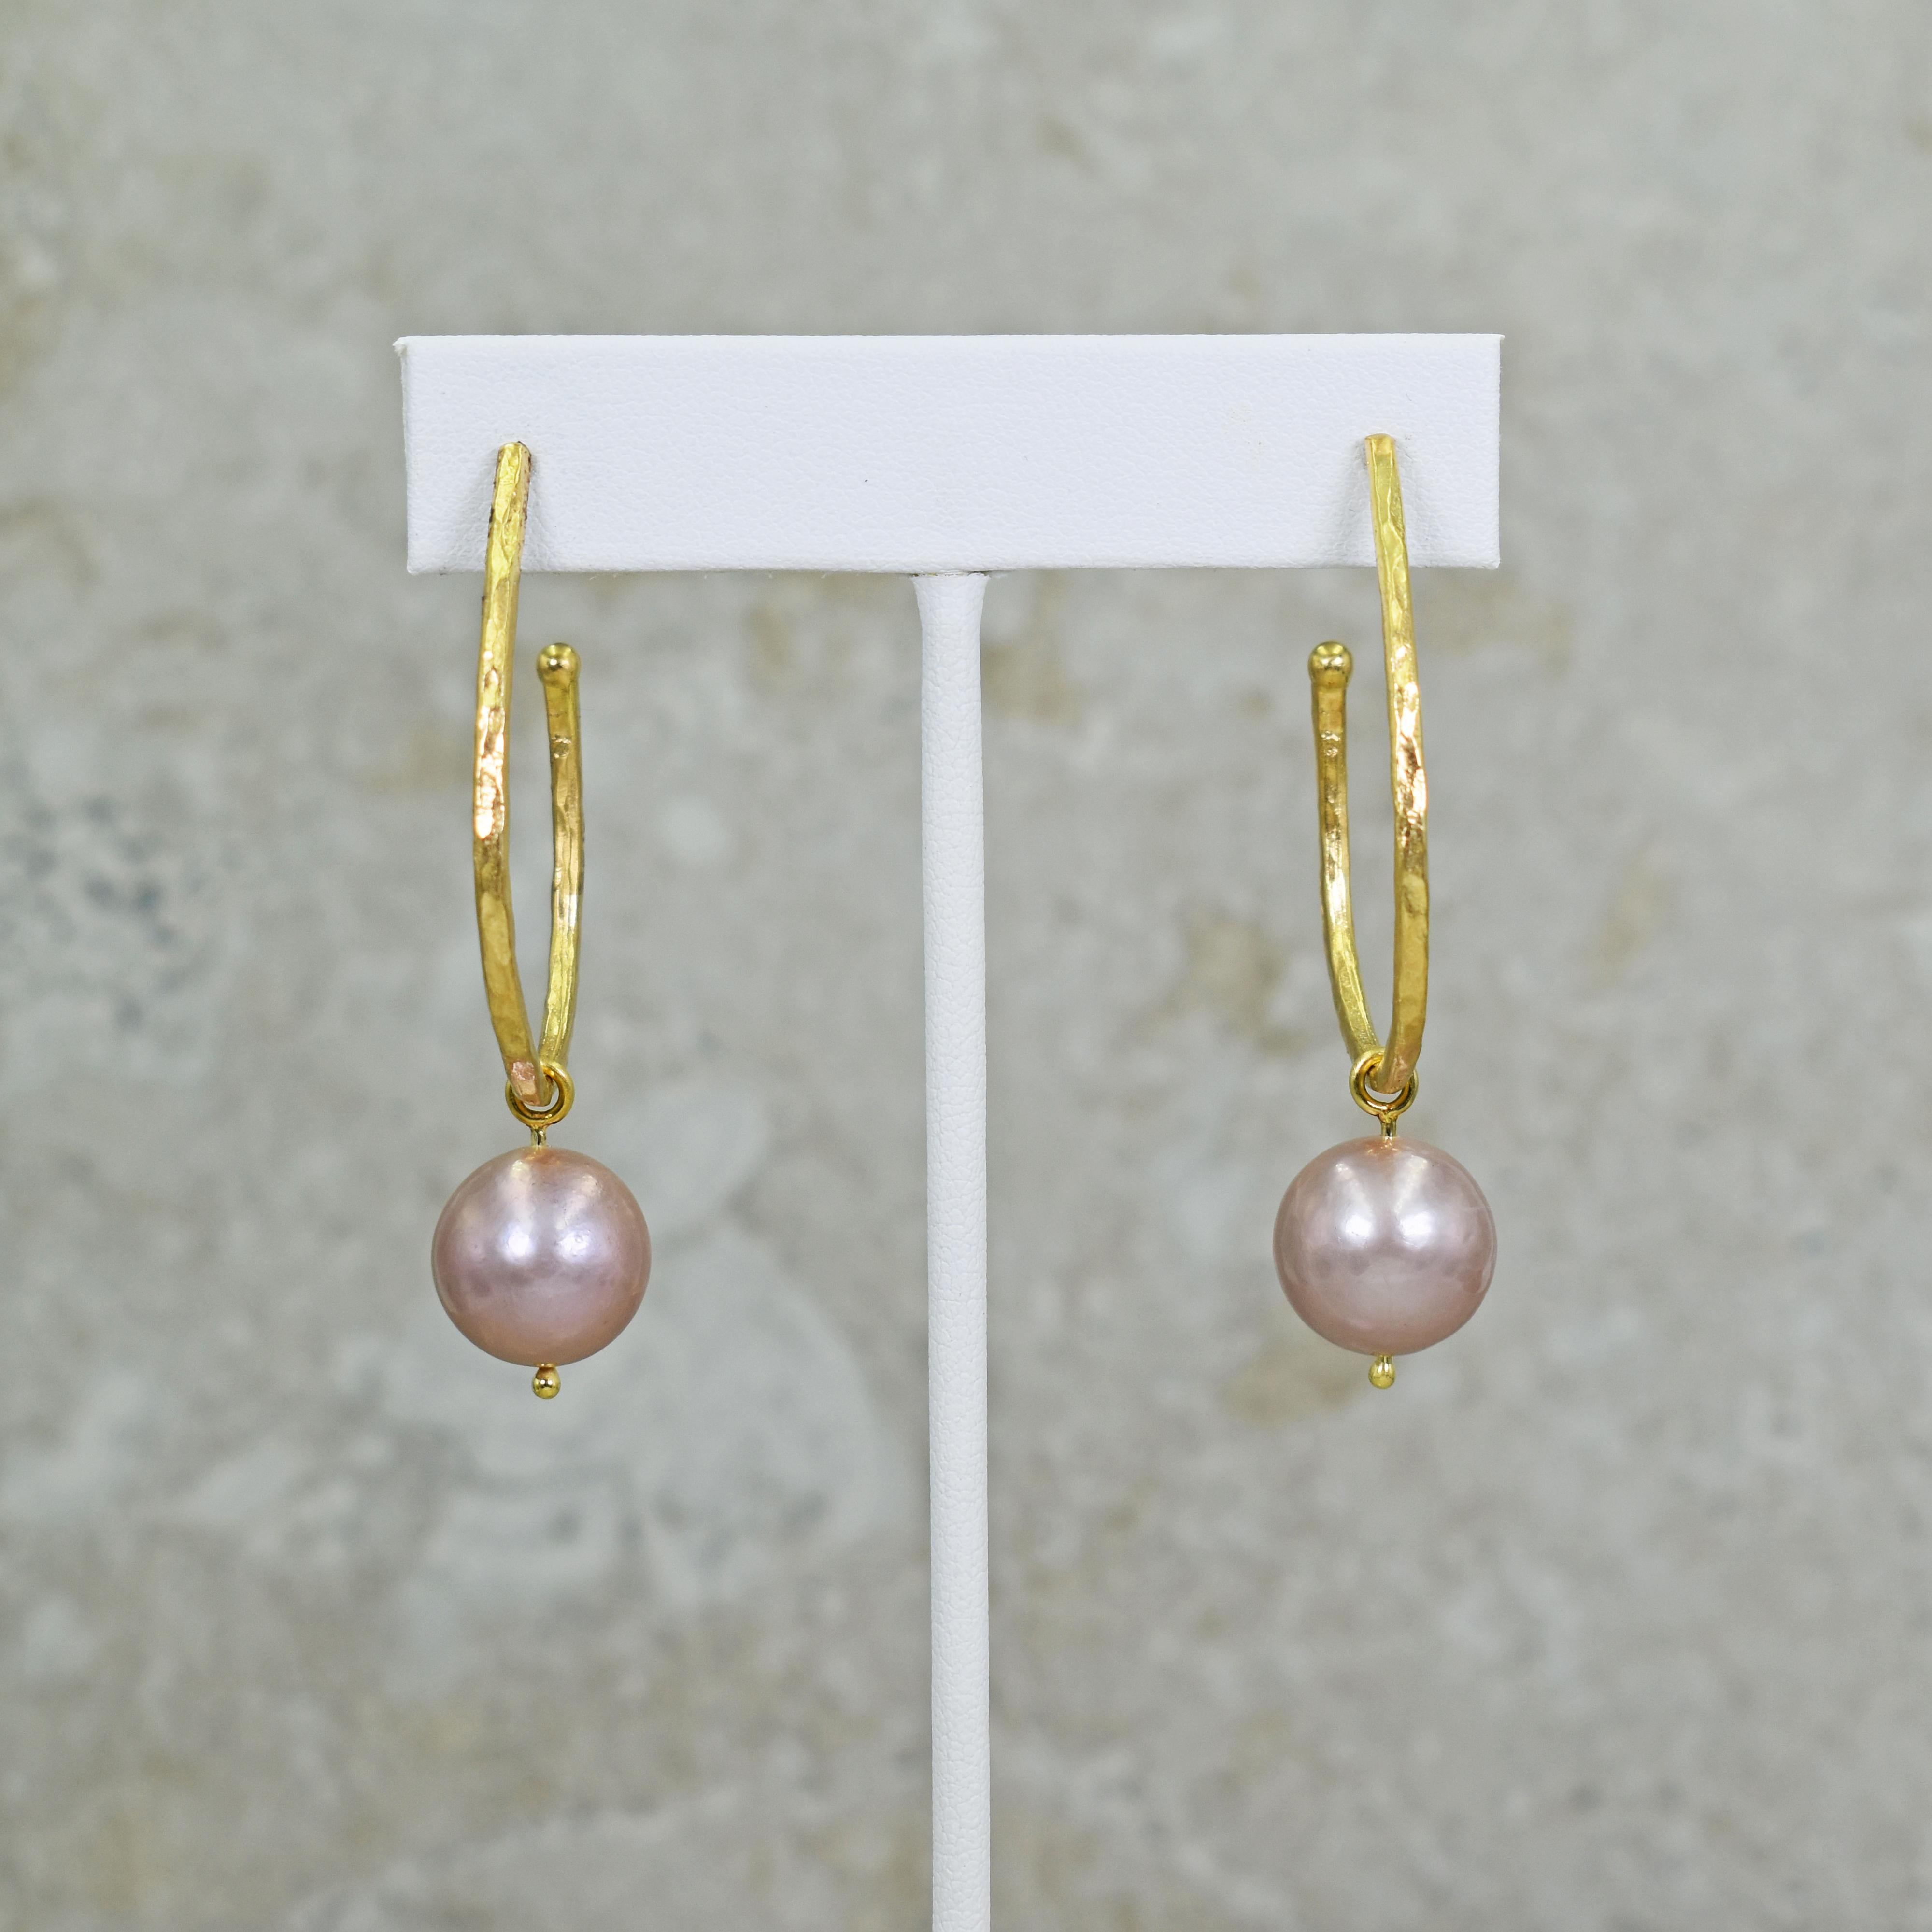 Hammered 18k yellow gold elongated hoop stud earrings with 14mm Pink Freshwater Pearl charms. Hoop earrings are 1.63 inches in length, and with pearl charms, earrings are 2.25 inches in total length. Charms can be removed so the hoops can be worn